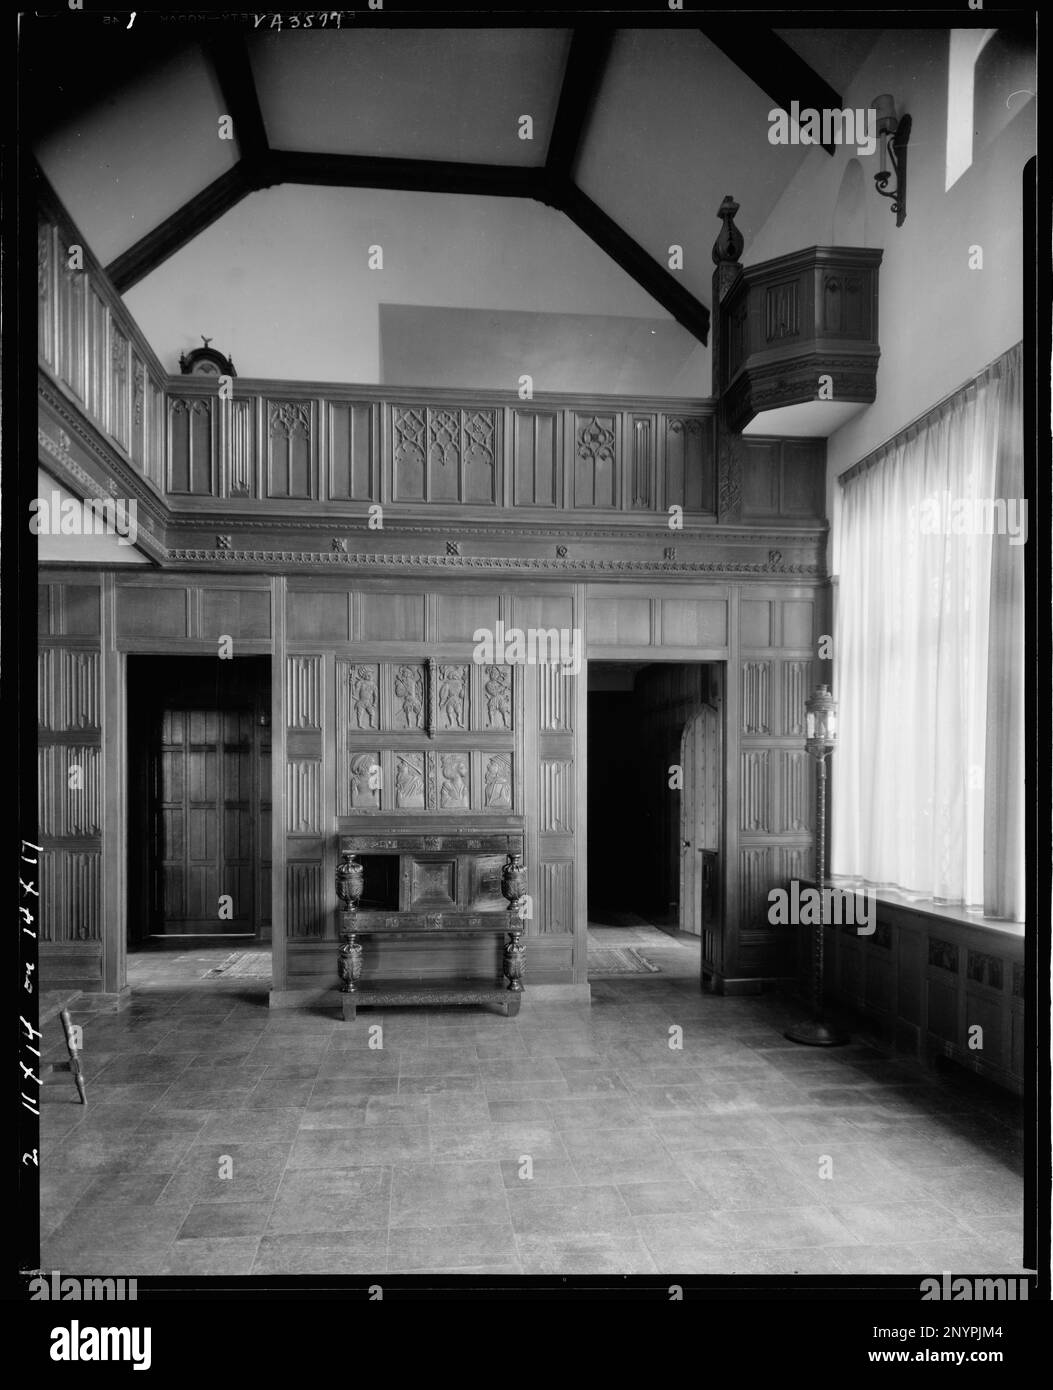 Agecroft Hall, Richmond, Henrico County, Virginia. Carnegie Survey of the Architecture of the South. United States  Virginia  Henrico County  Richmond, Paneling, Woodwork, Interiors. Stock Photo